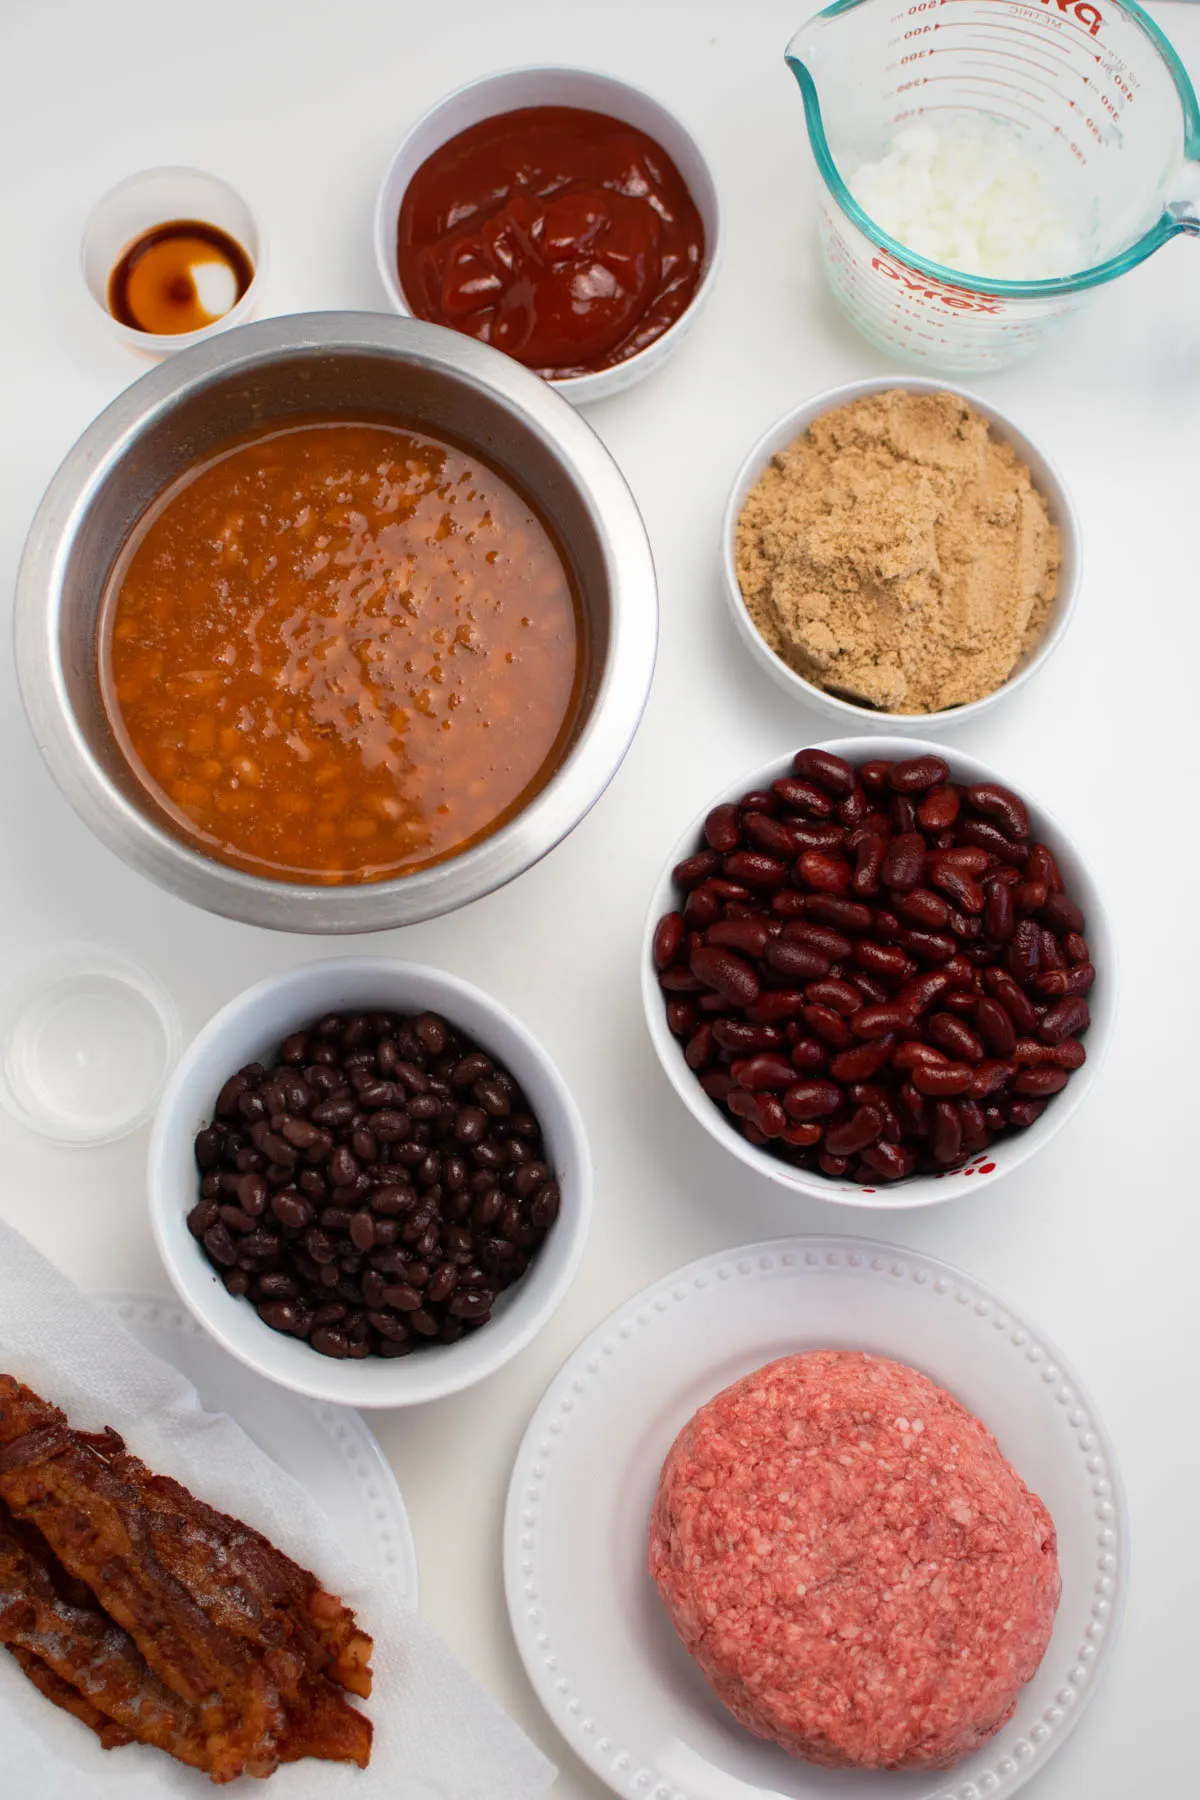 Bowls of ingredients for cowboy baked beans including kidney beans, pork and beans, and bacon.